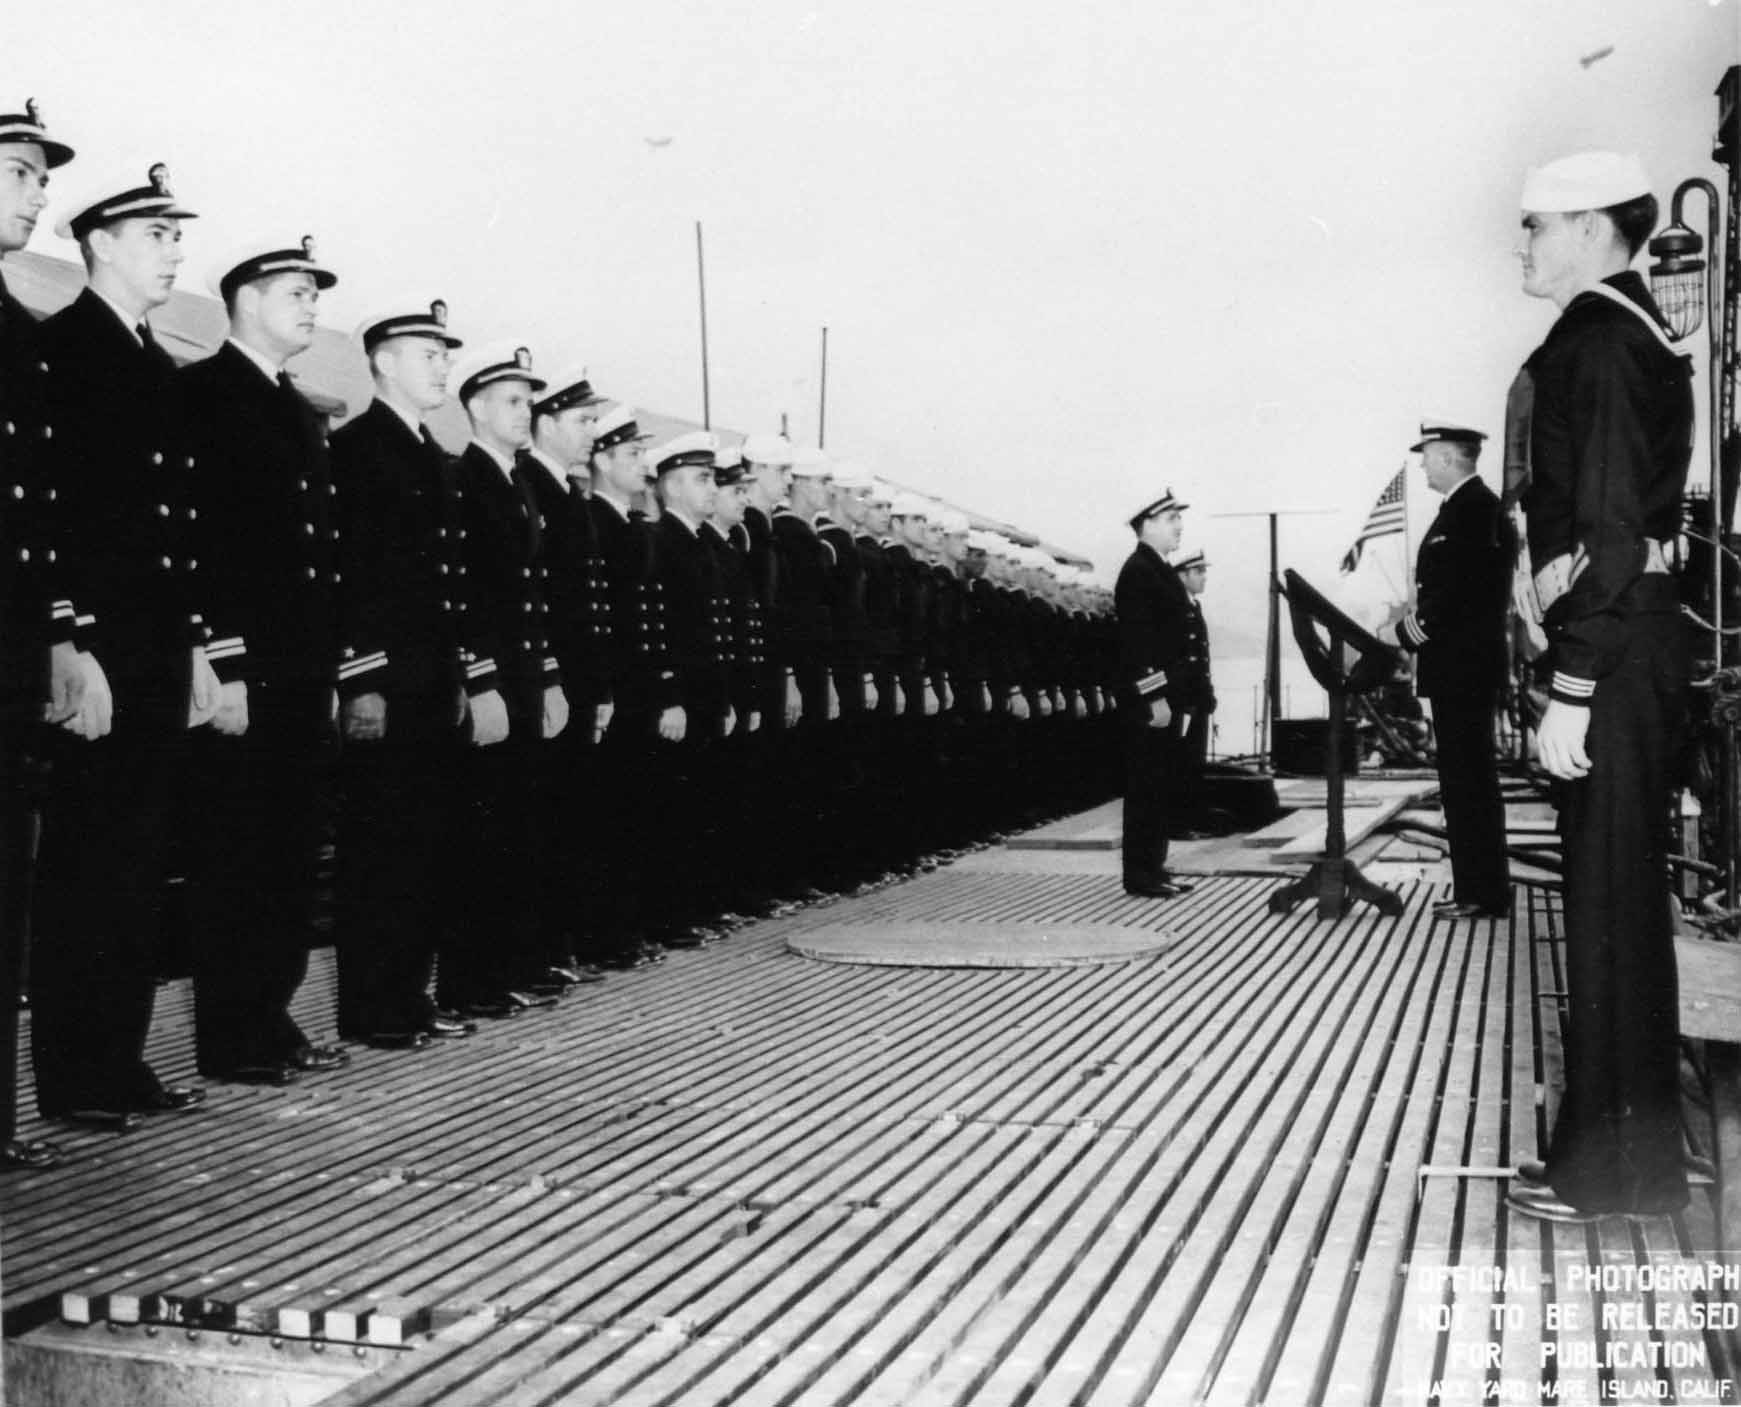 Commissioning ceremony of USS Tunny, Mare Island Naval Shipyard, Vallejo, California, United States, 1 Sep 1942, photo 2 of 2